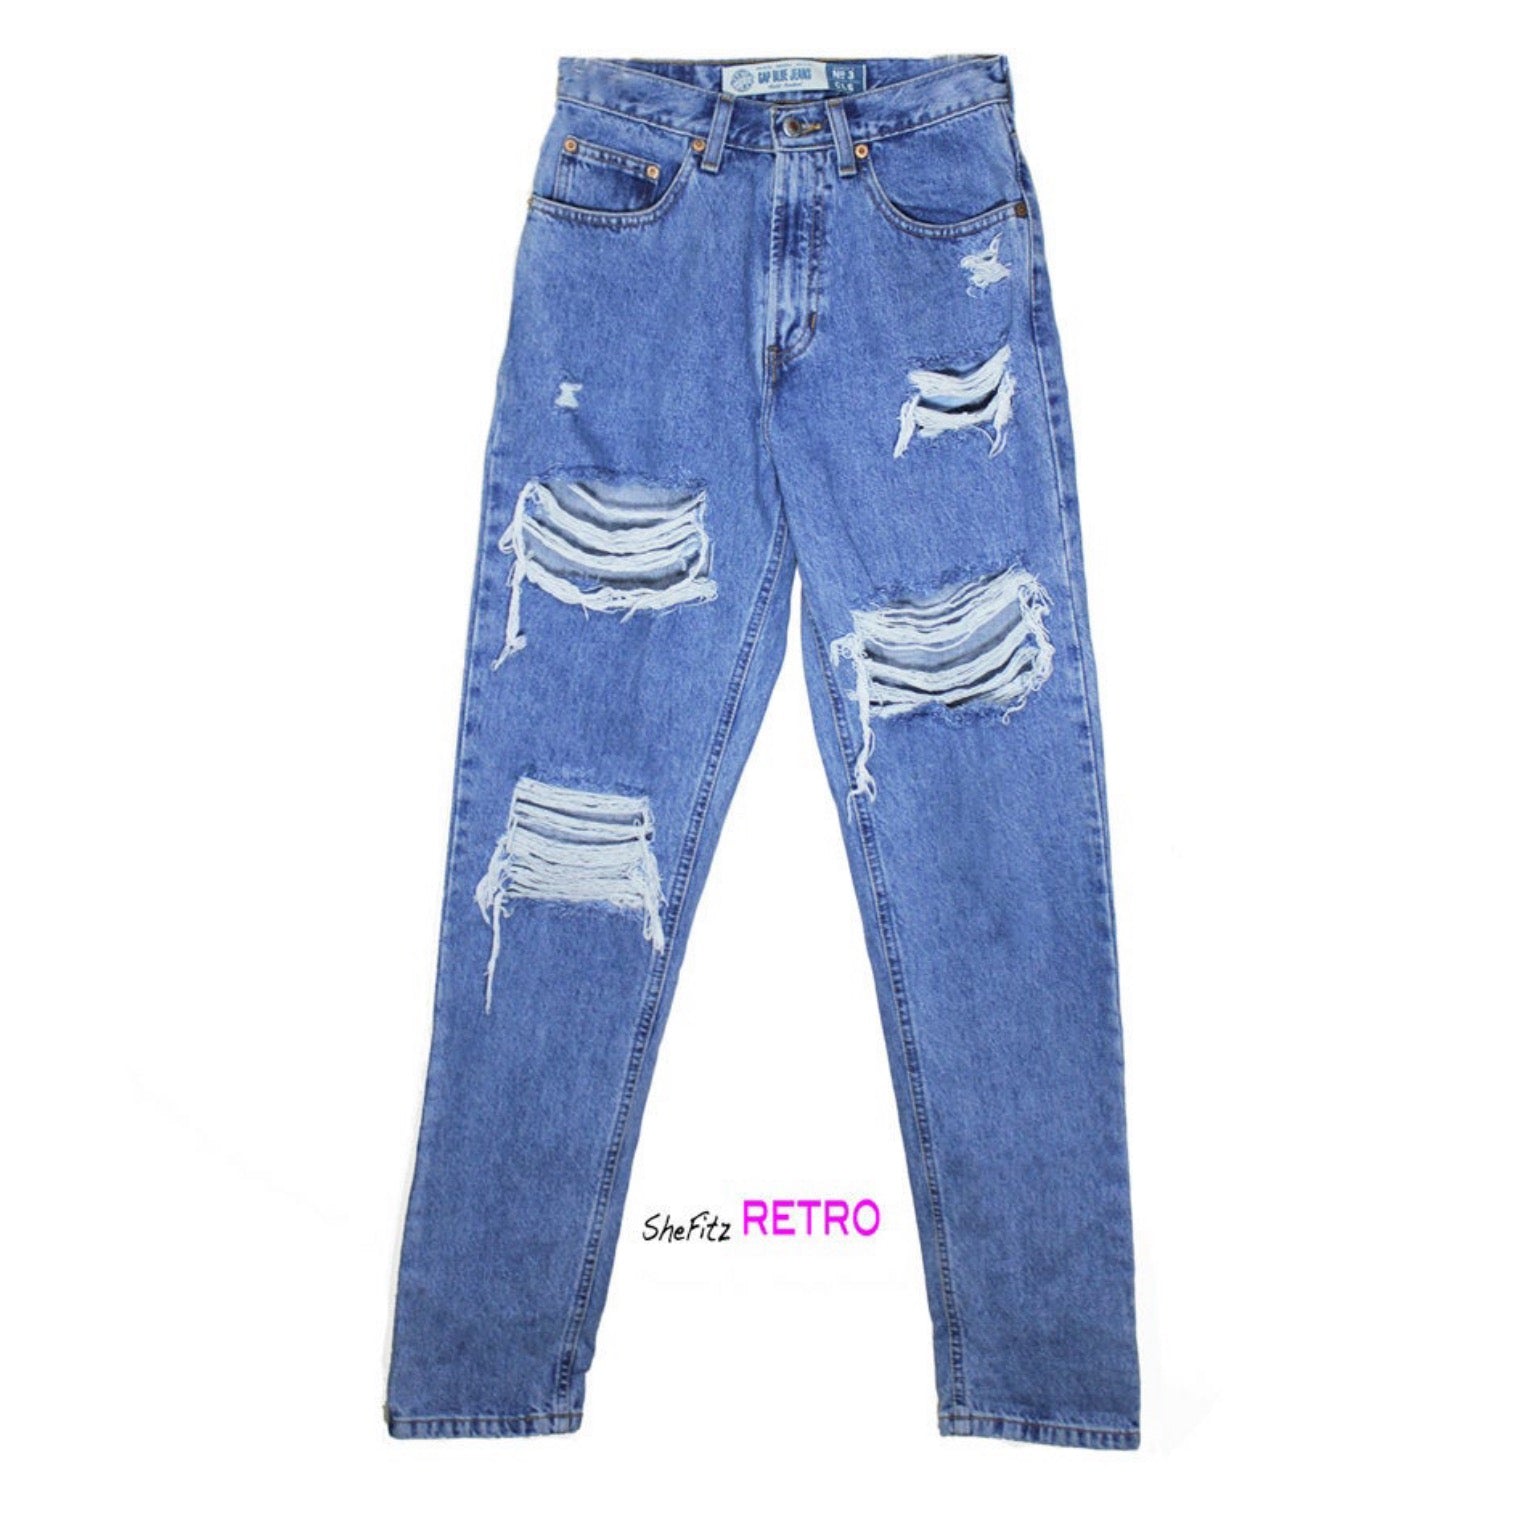 Made To Order Distressed High-Rise Boyfriend Jeans